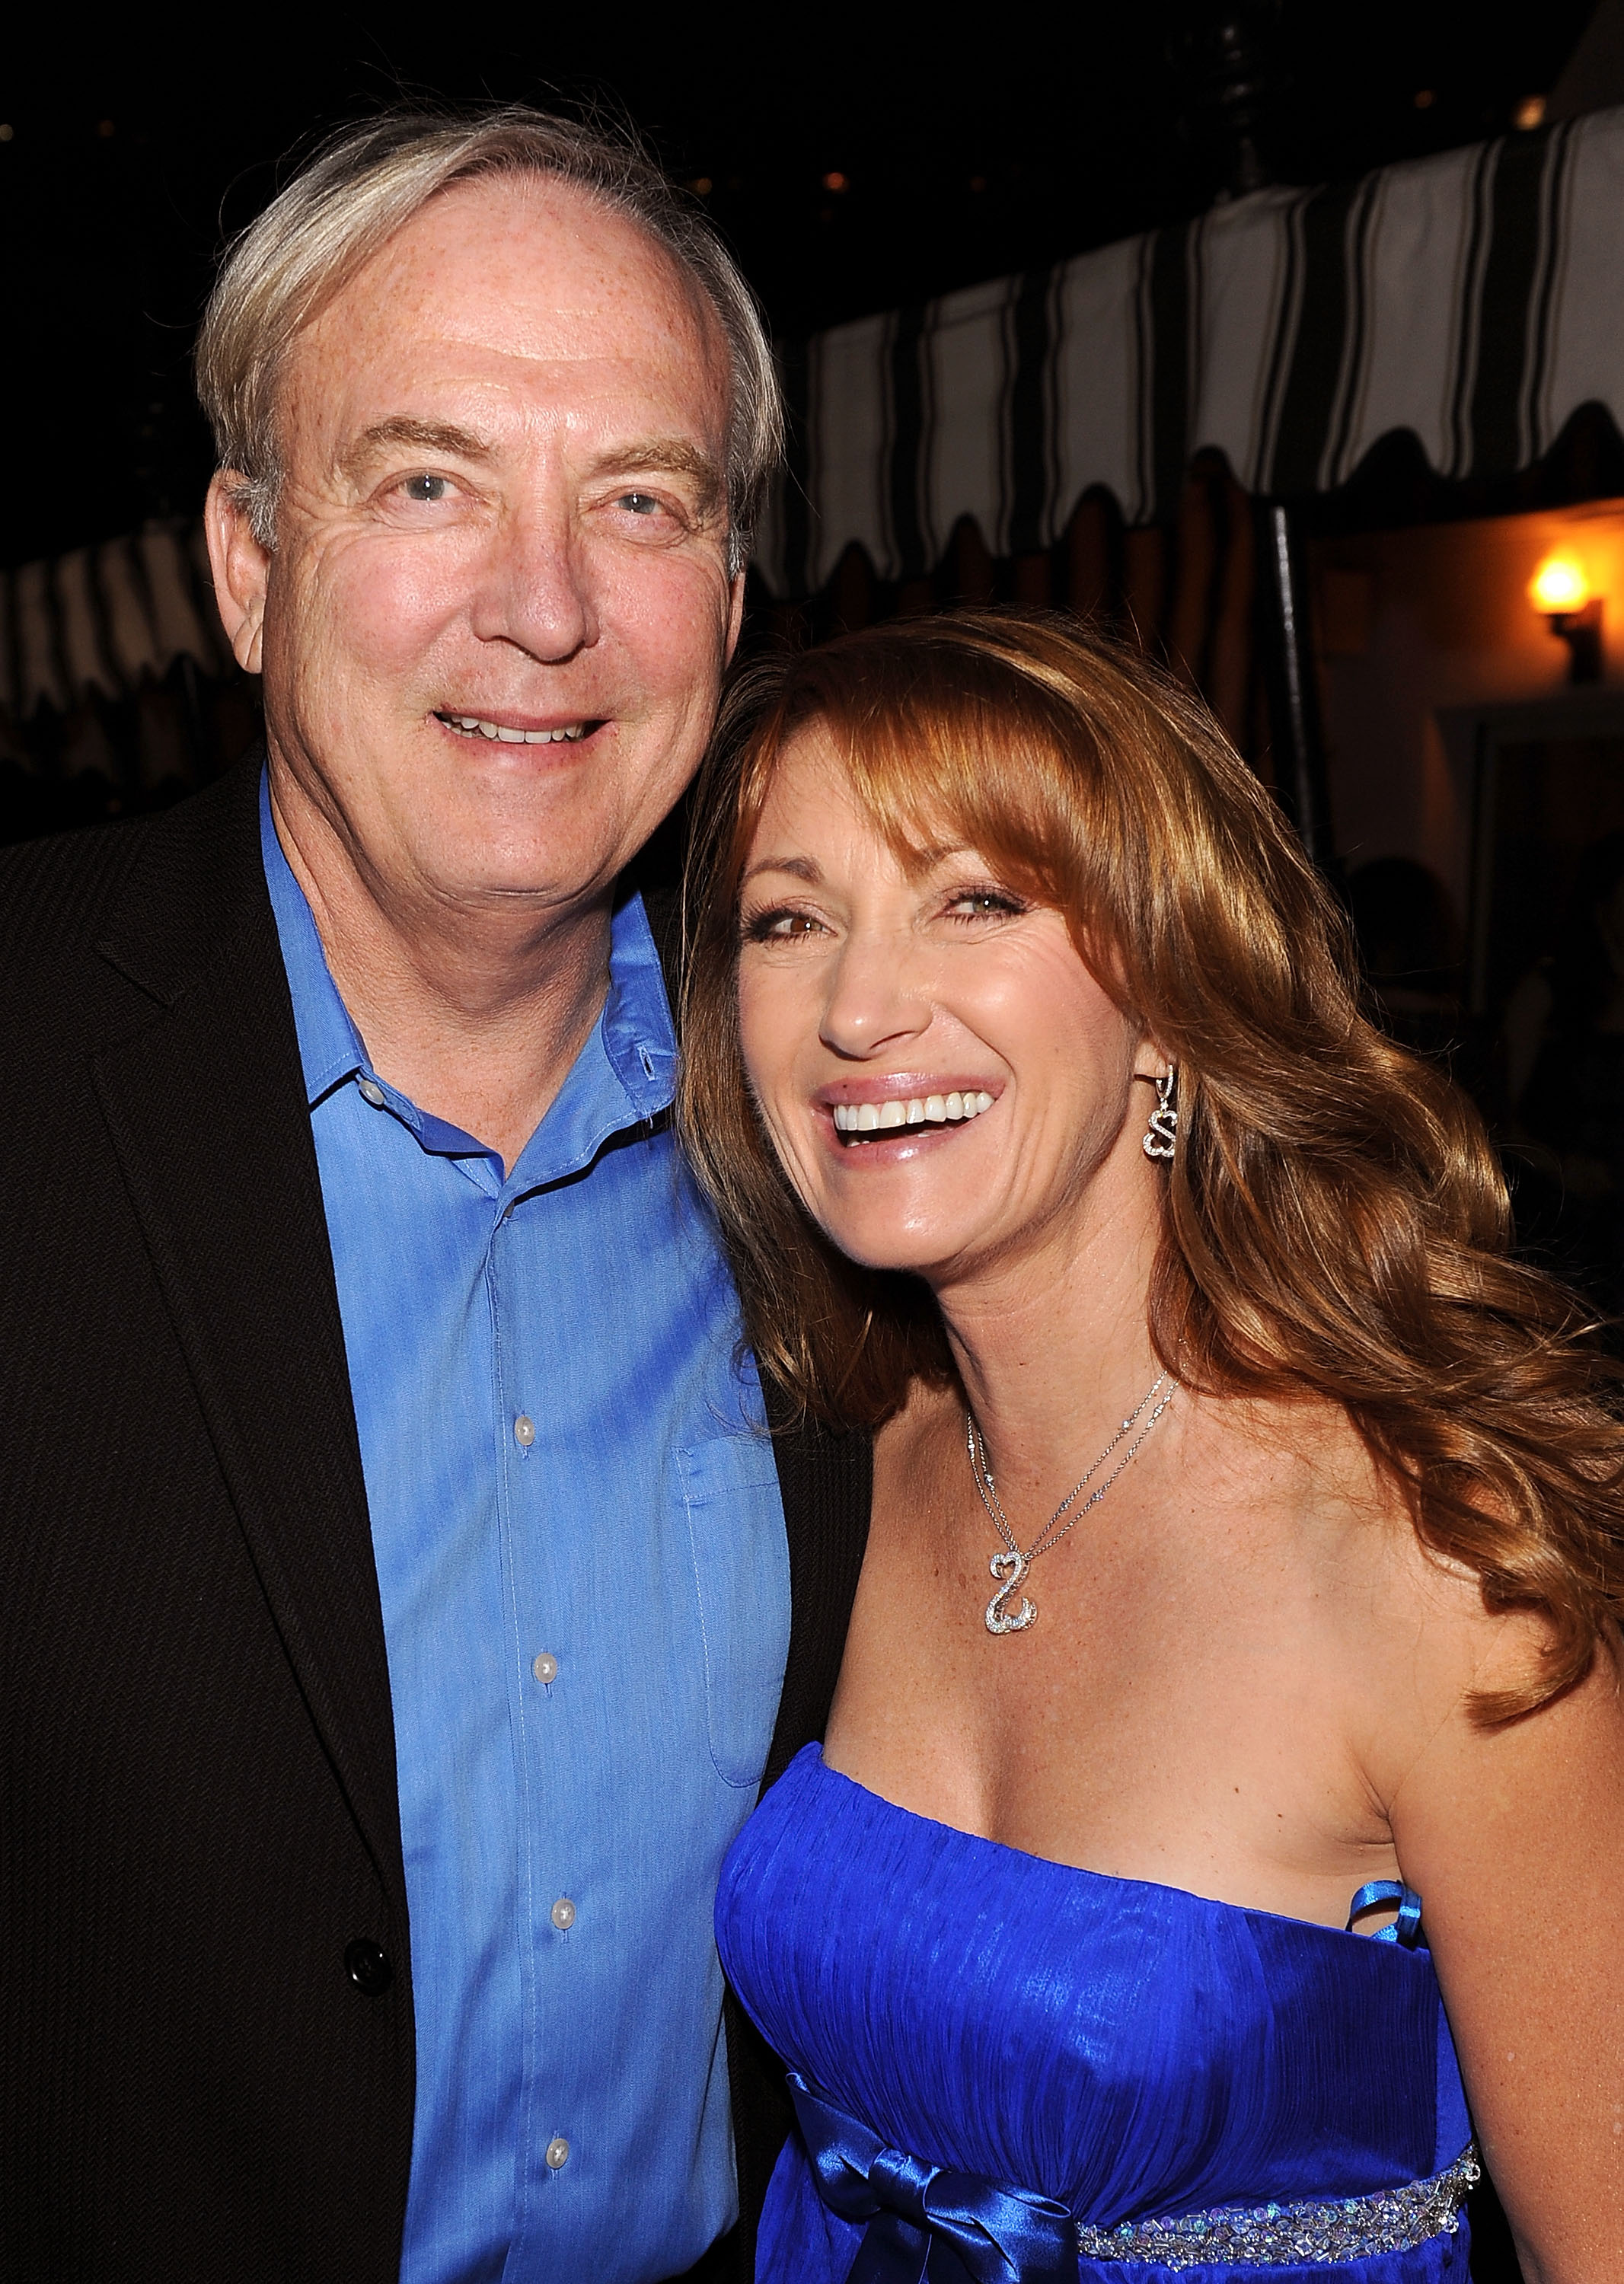 James Keach and Jane Seymour at the Golden Globes party at Chateau Marmont on January 15, 2010 in Los Angeles, California | Source: Getty Images